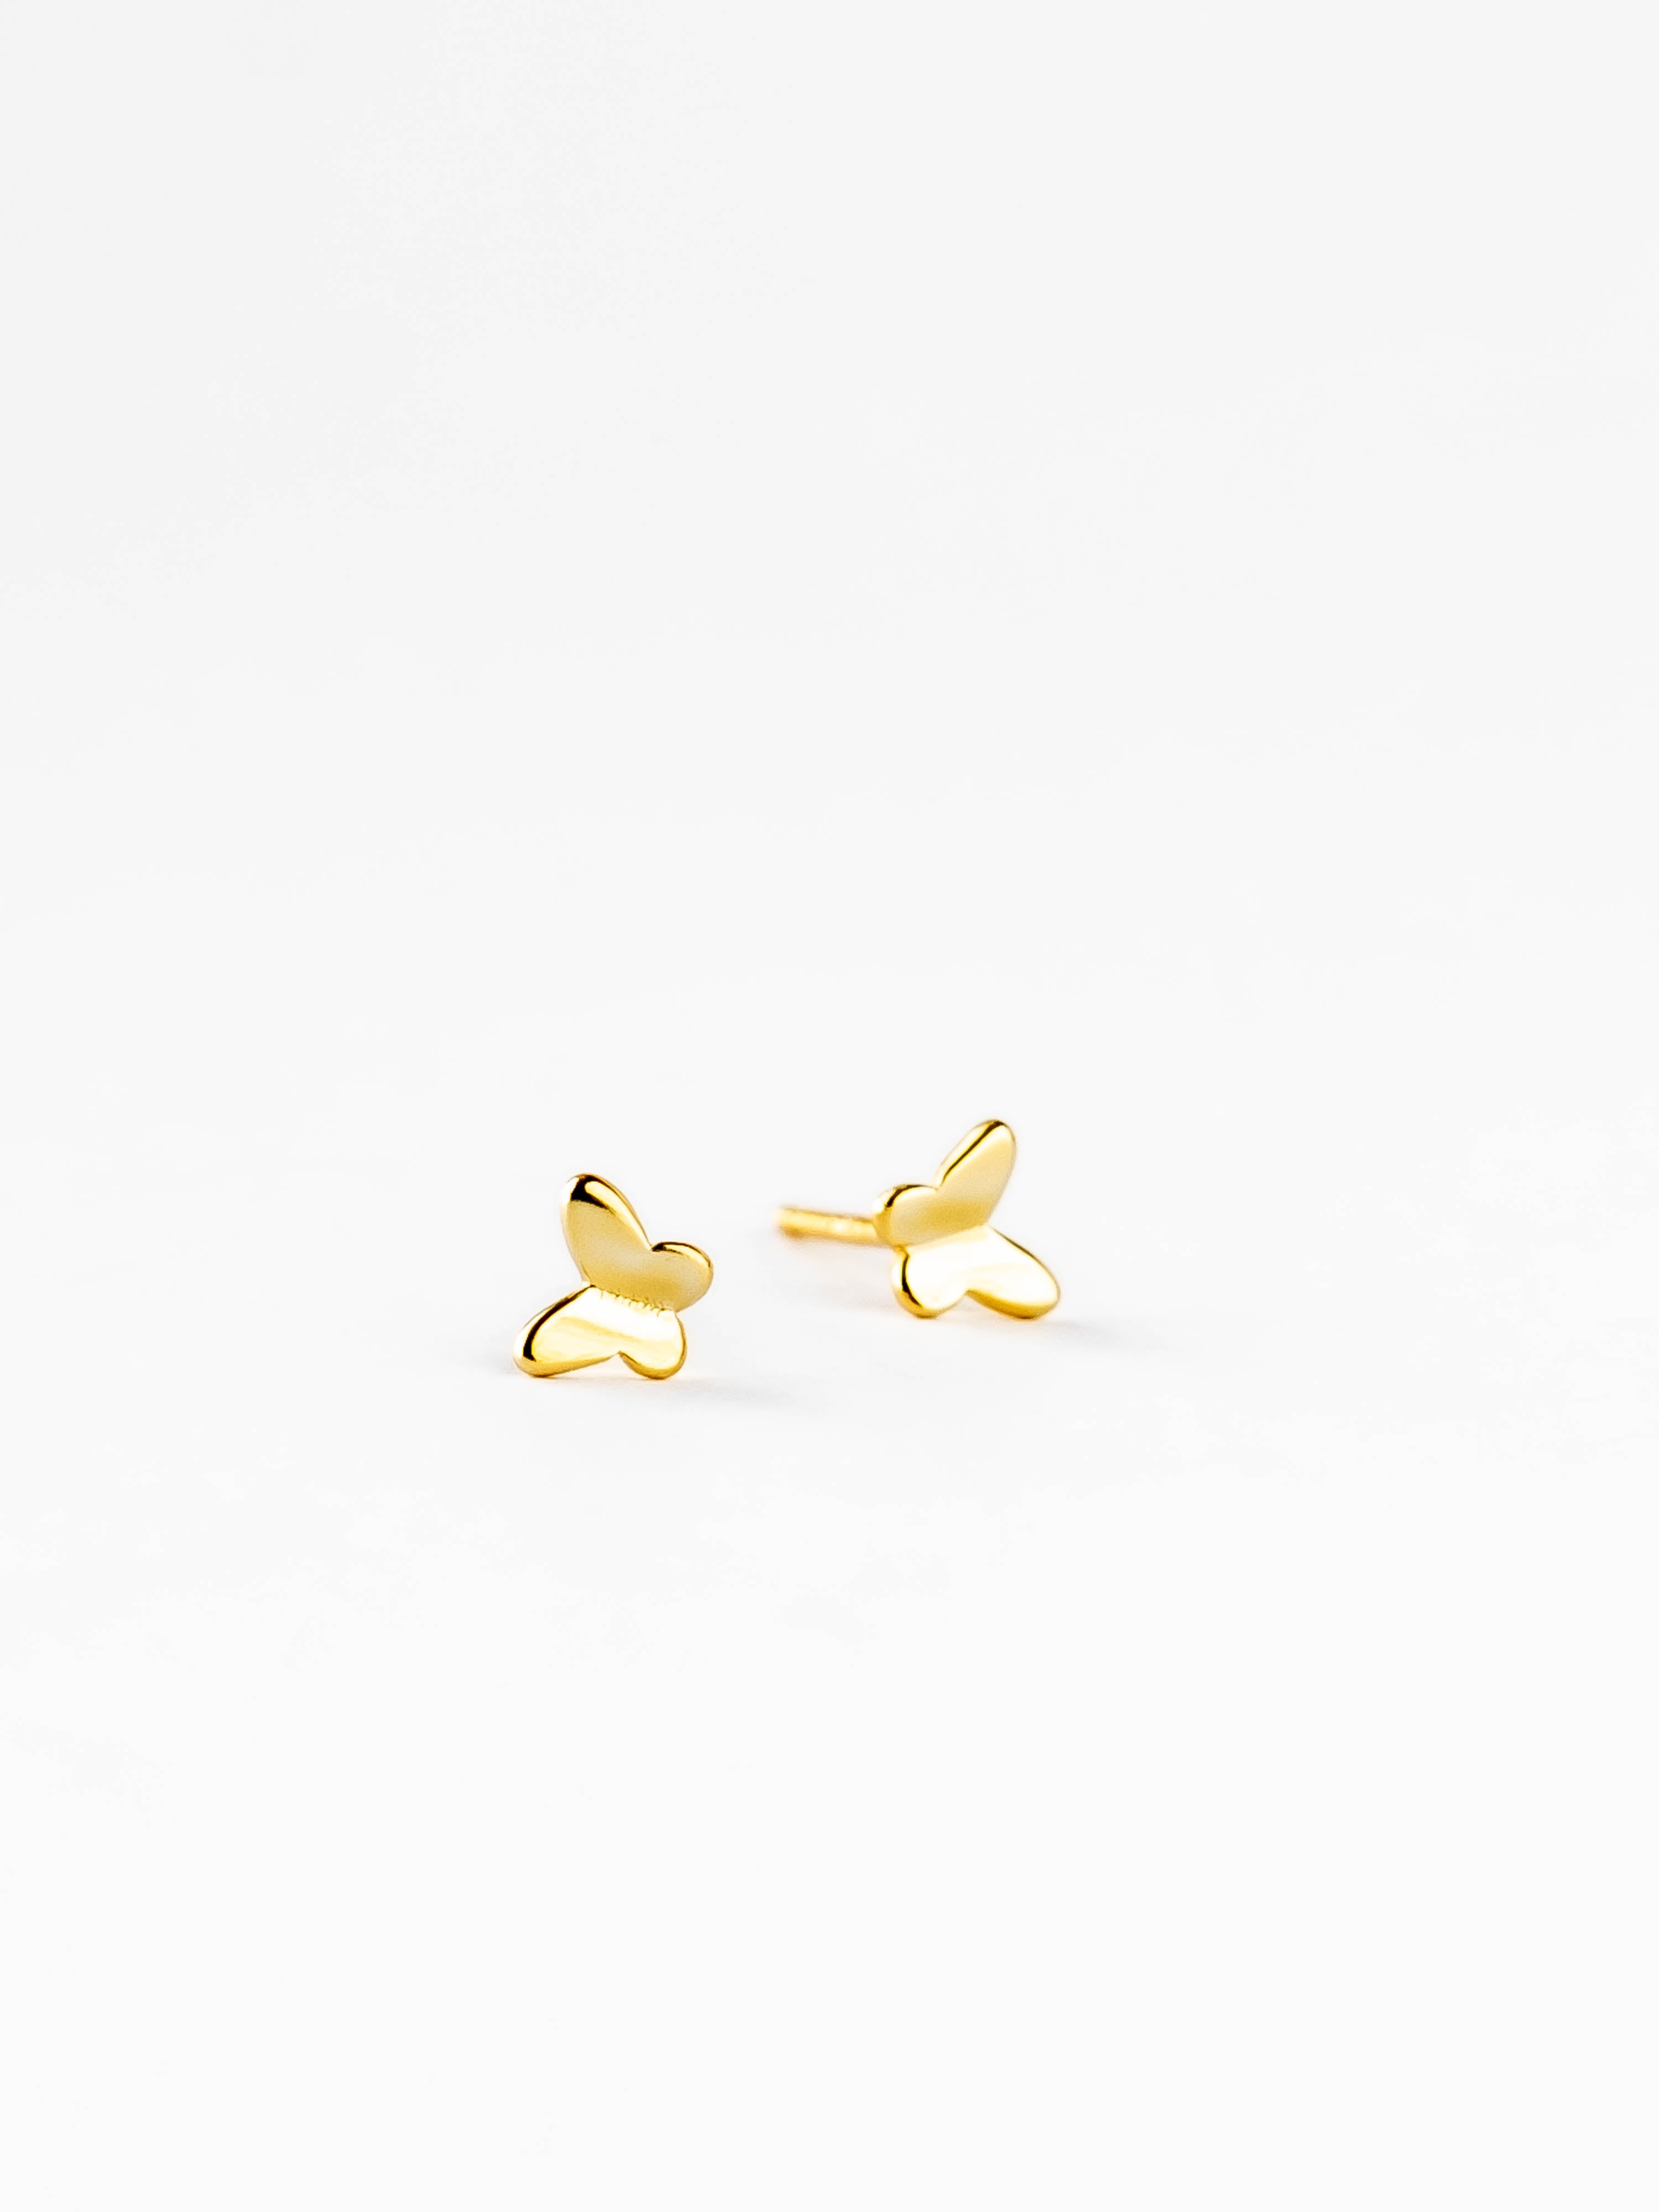 Tiny butterfly gold earrings freeshipping - Ollijewelry